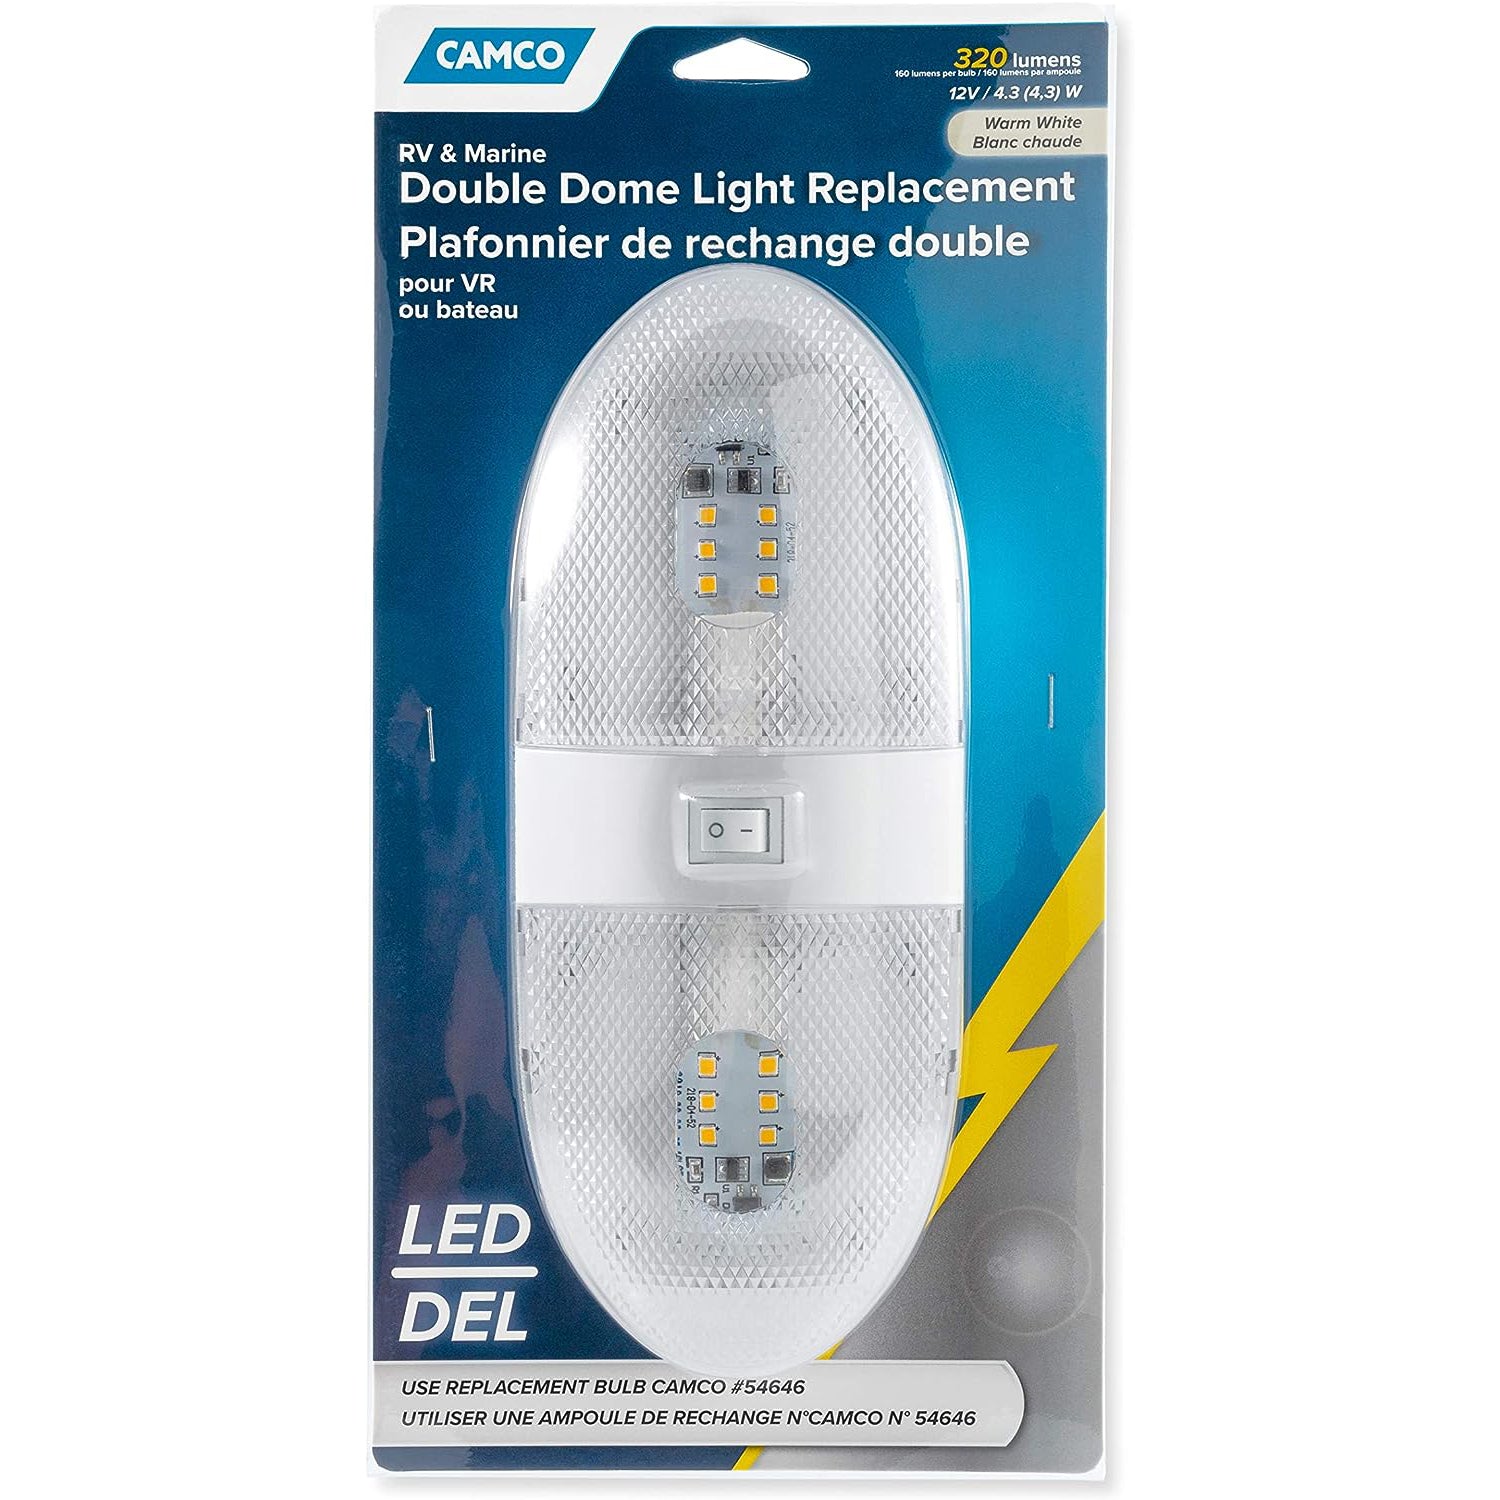 Camco-Double Dome Light Replacement LED 320lmn